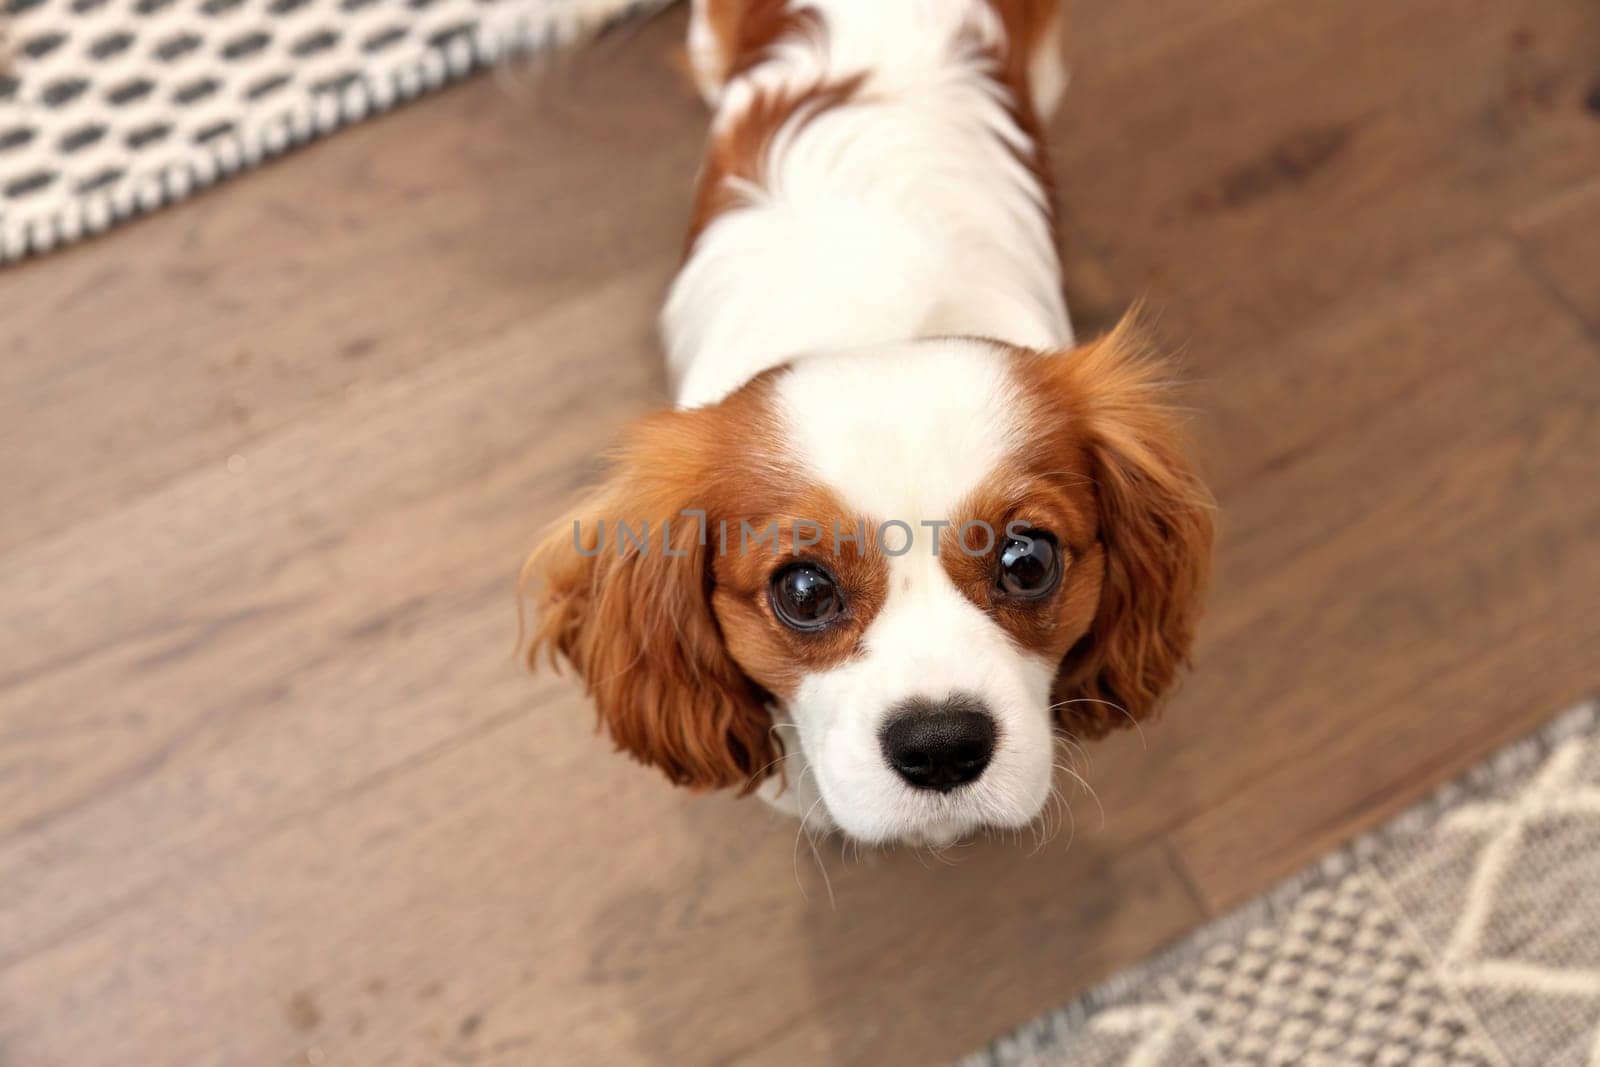 Adorable Cavalier King Charles Spaniel Looking Expectantly Up at Camera with Puppy Dog Eyes. High quality photo